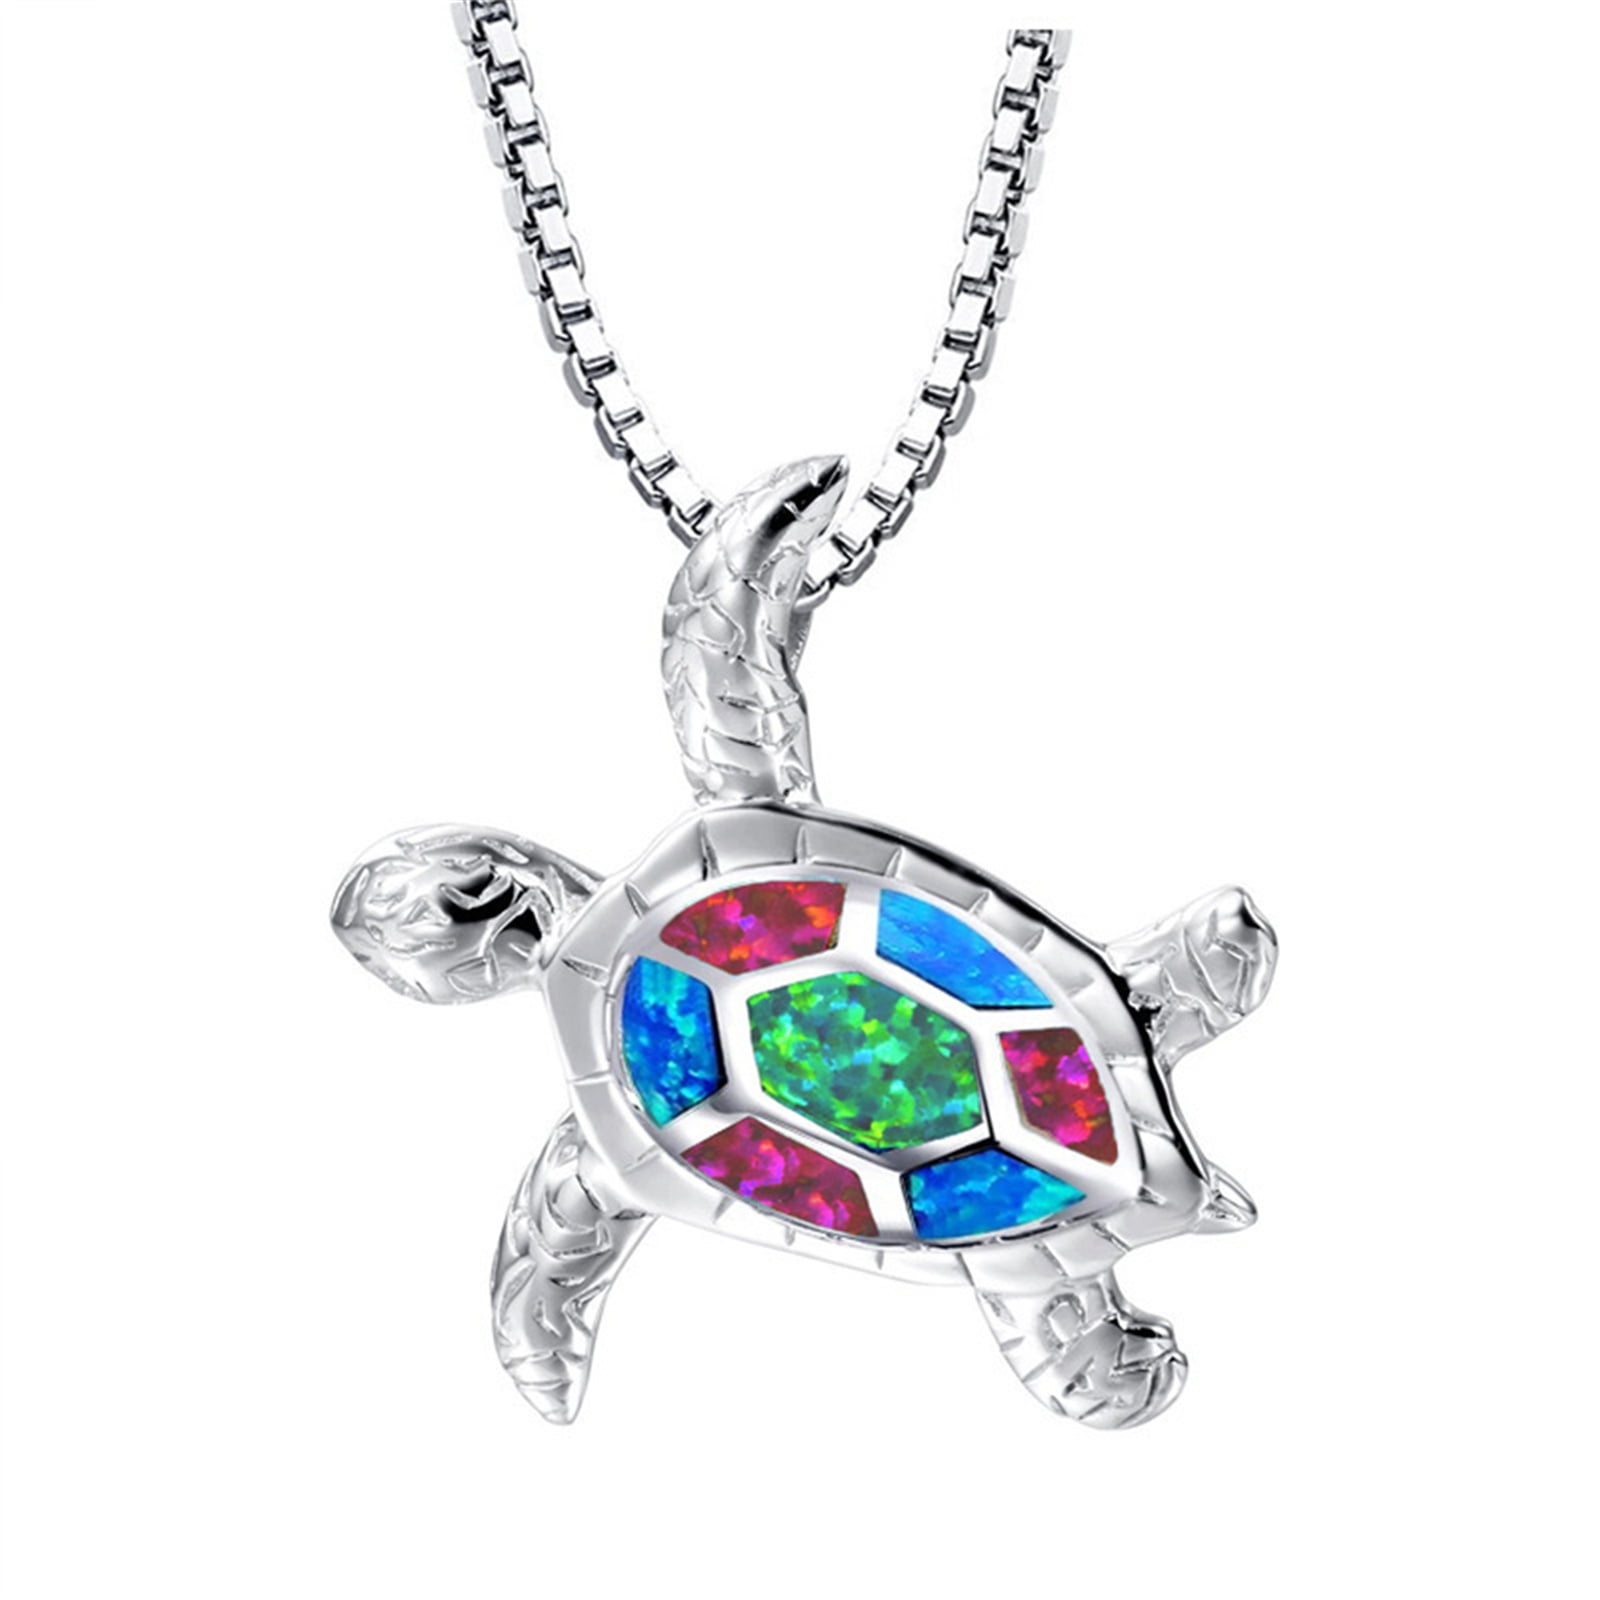 Chic Silver Plated Blue Opal Sea Turtle Cutout Pendant Women Necklace Beach Gift 